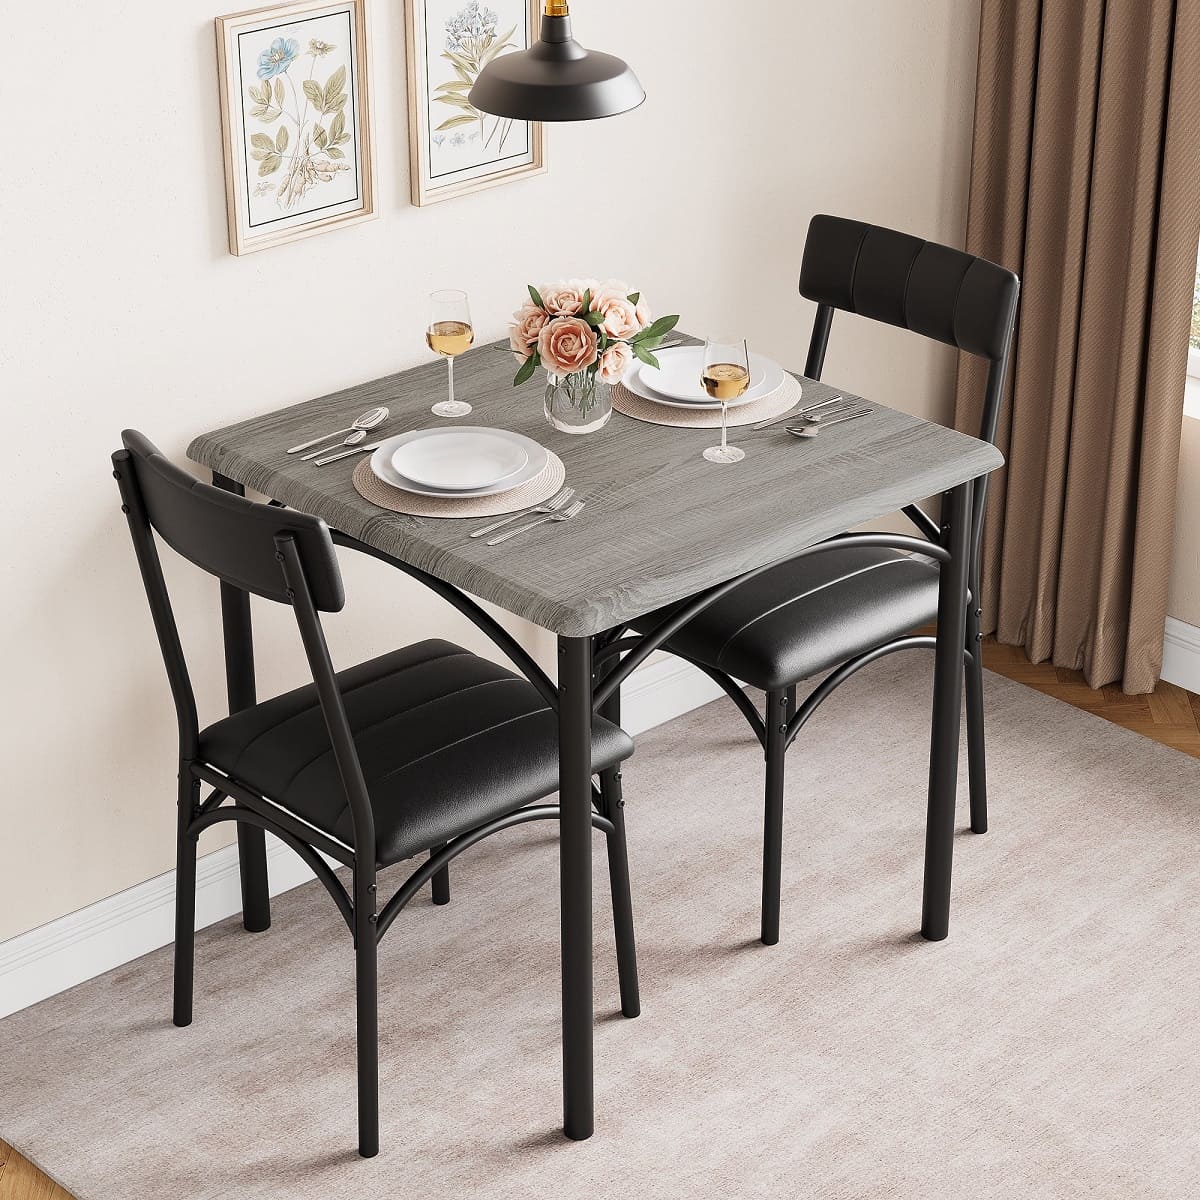 How To Decorate A Small Dining Table